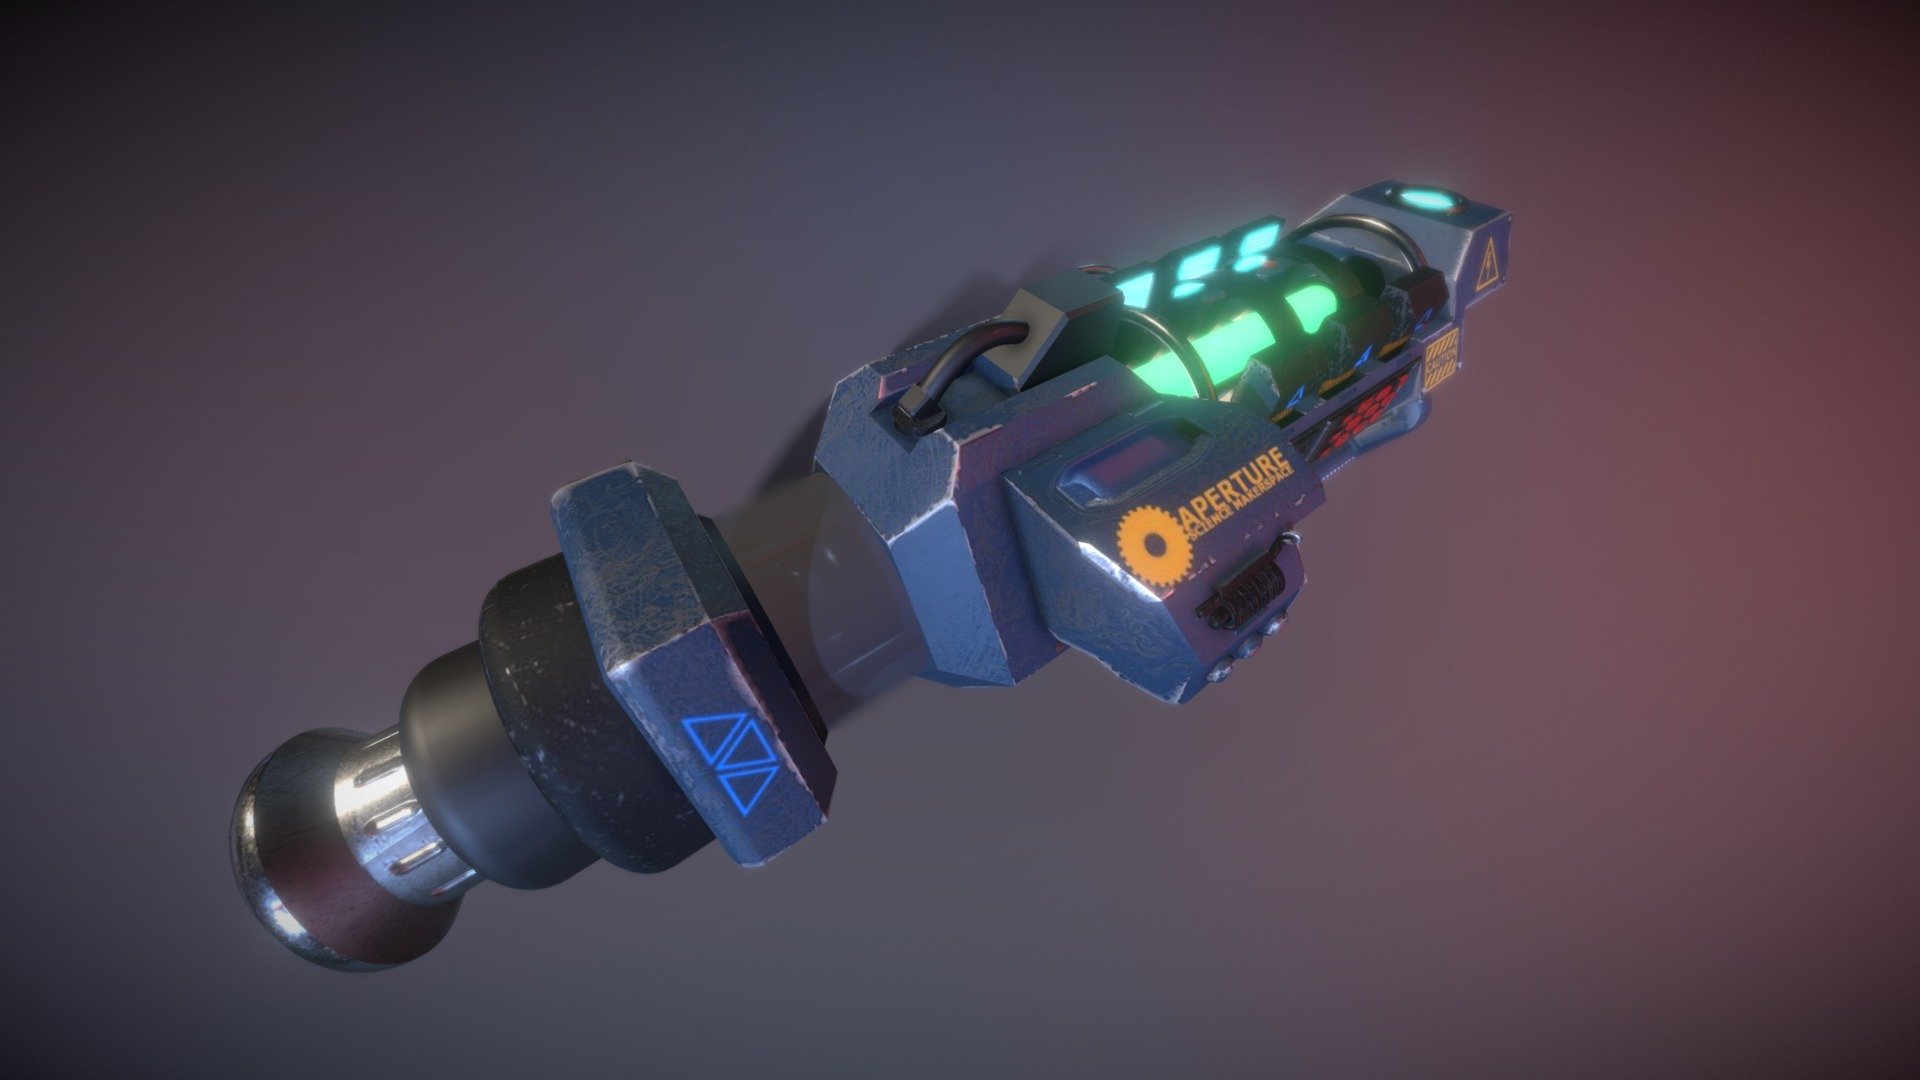 This Guns is Spetial SuperWeapon, called Portal gun, by orange button will open orange portal, and the same thing for blue button, and the green button for gravity effect, 
Thanks - Portal Gun Advanced - 3D model by Amine.Elouneg 3d model